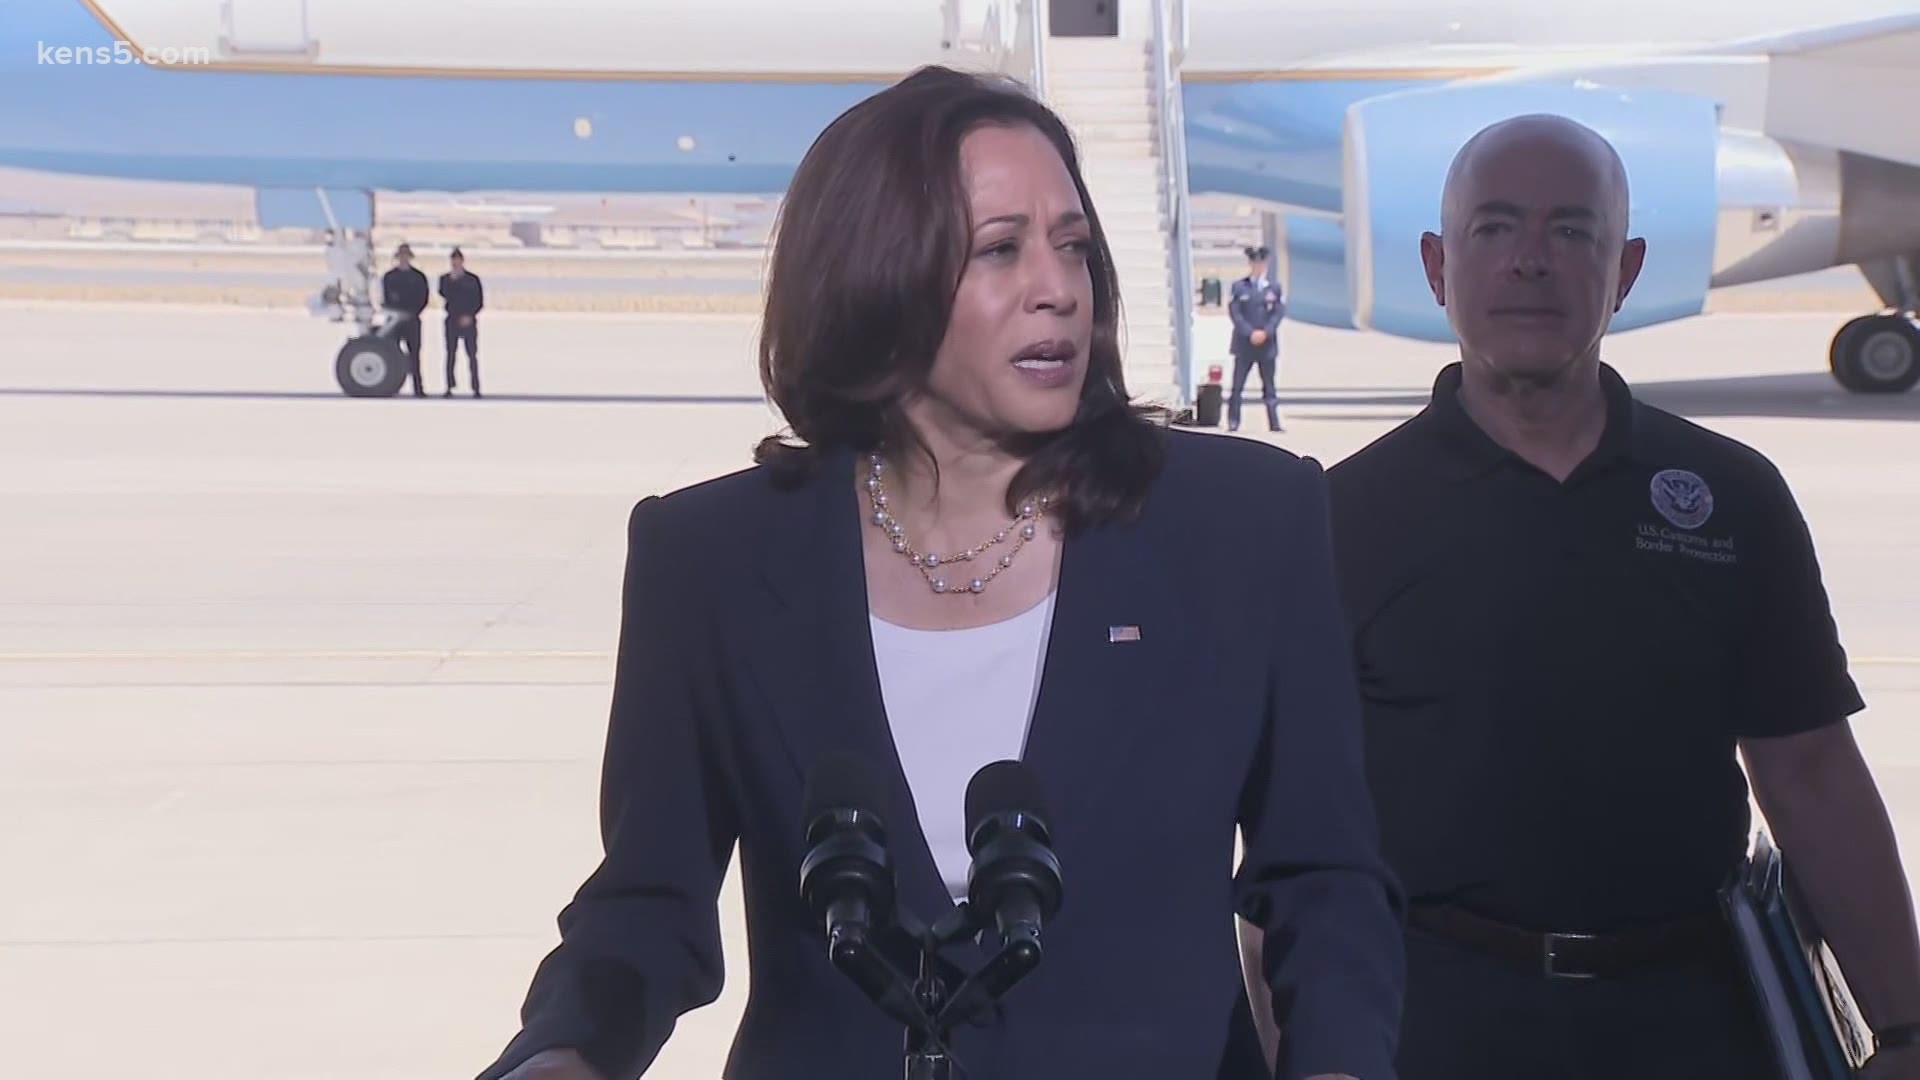 Harris arrived in El Paso Friday following criticism from both parties about her continued deferring of the trip.